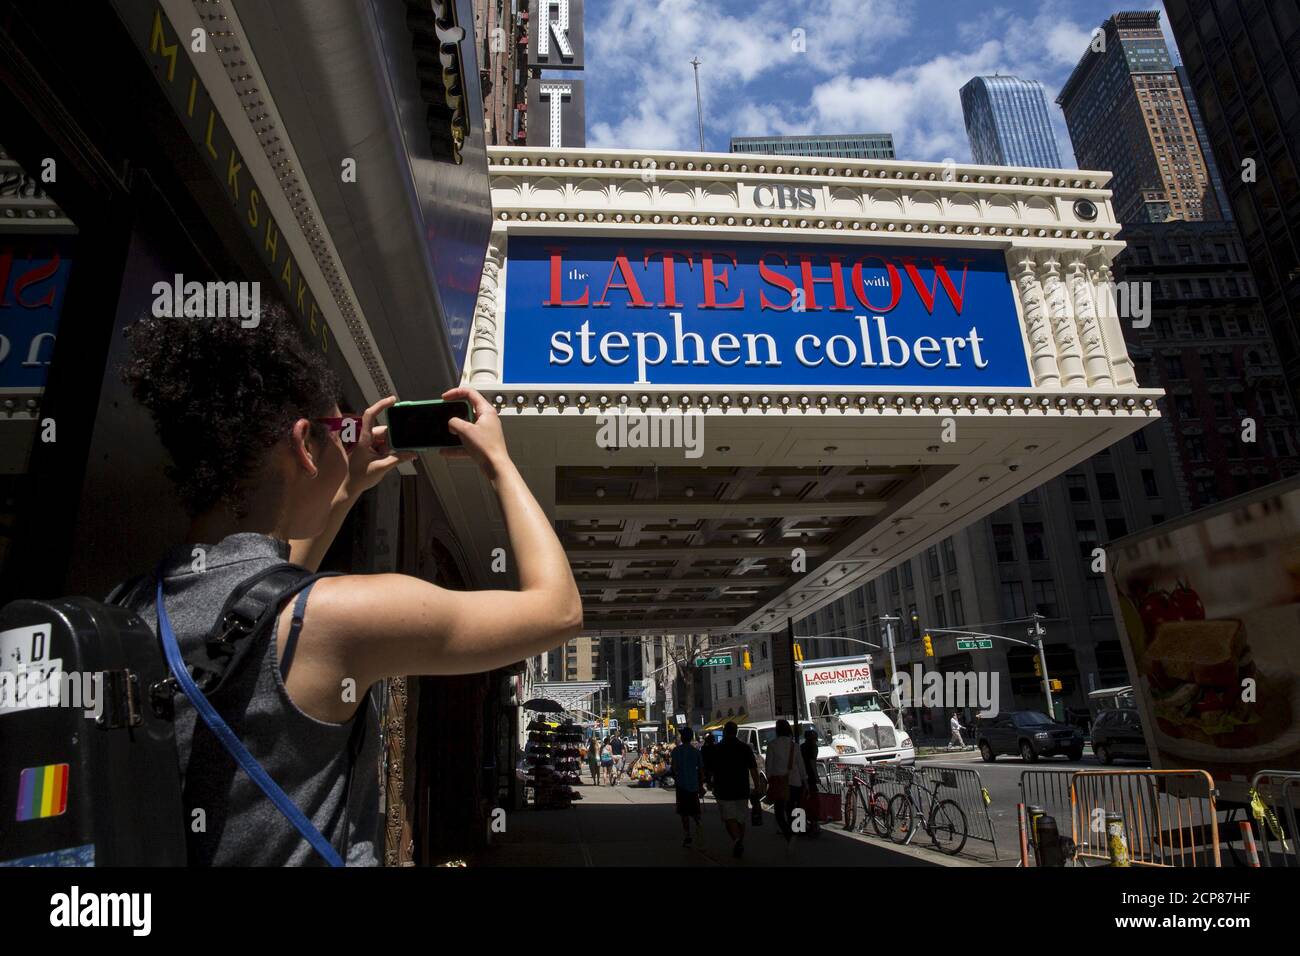 A girl takes a photo of the marquee for 'The Late Show with Stephen Colbert' at the Ed Sullivan Theater in Manhattan, New York, August 21, 2015. Colbert is set to host the show, which was previously presented by David Letterman. REUTERS/Andrew Kelly Stock Photo